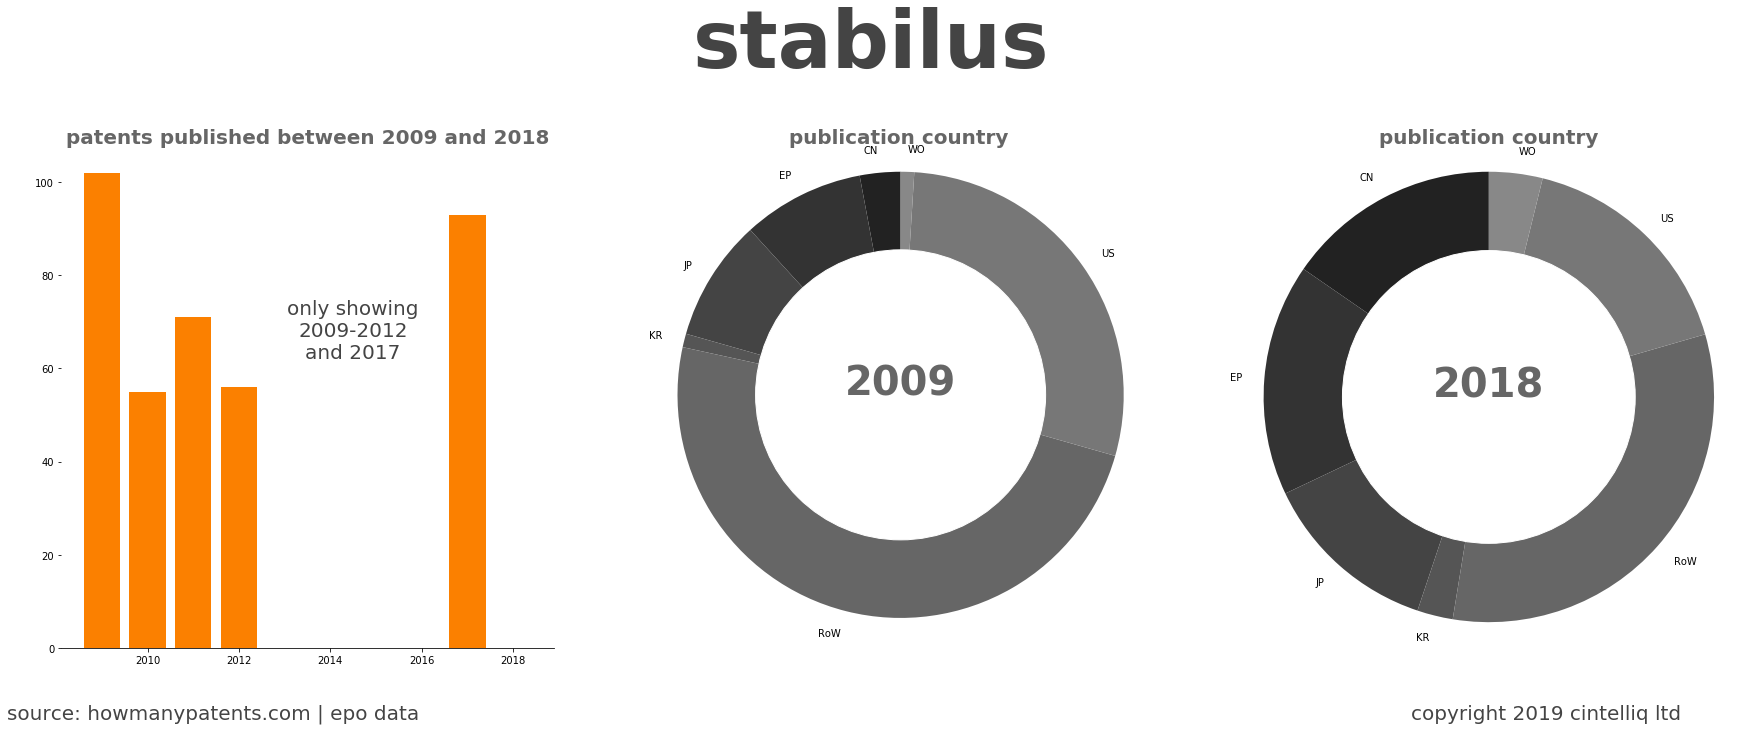 summary of patents for Stabilus